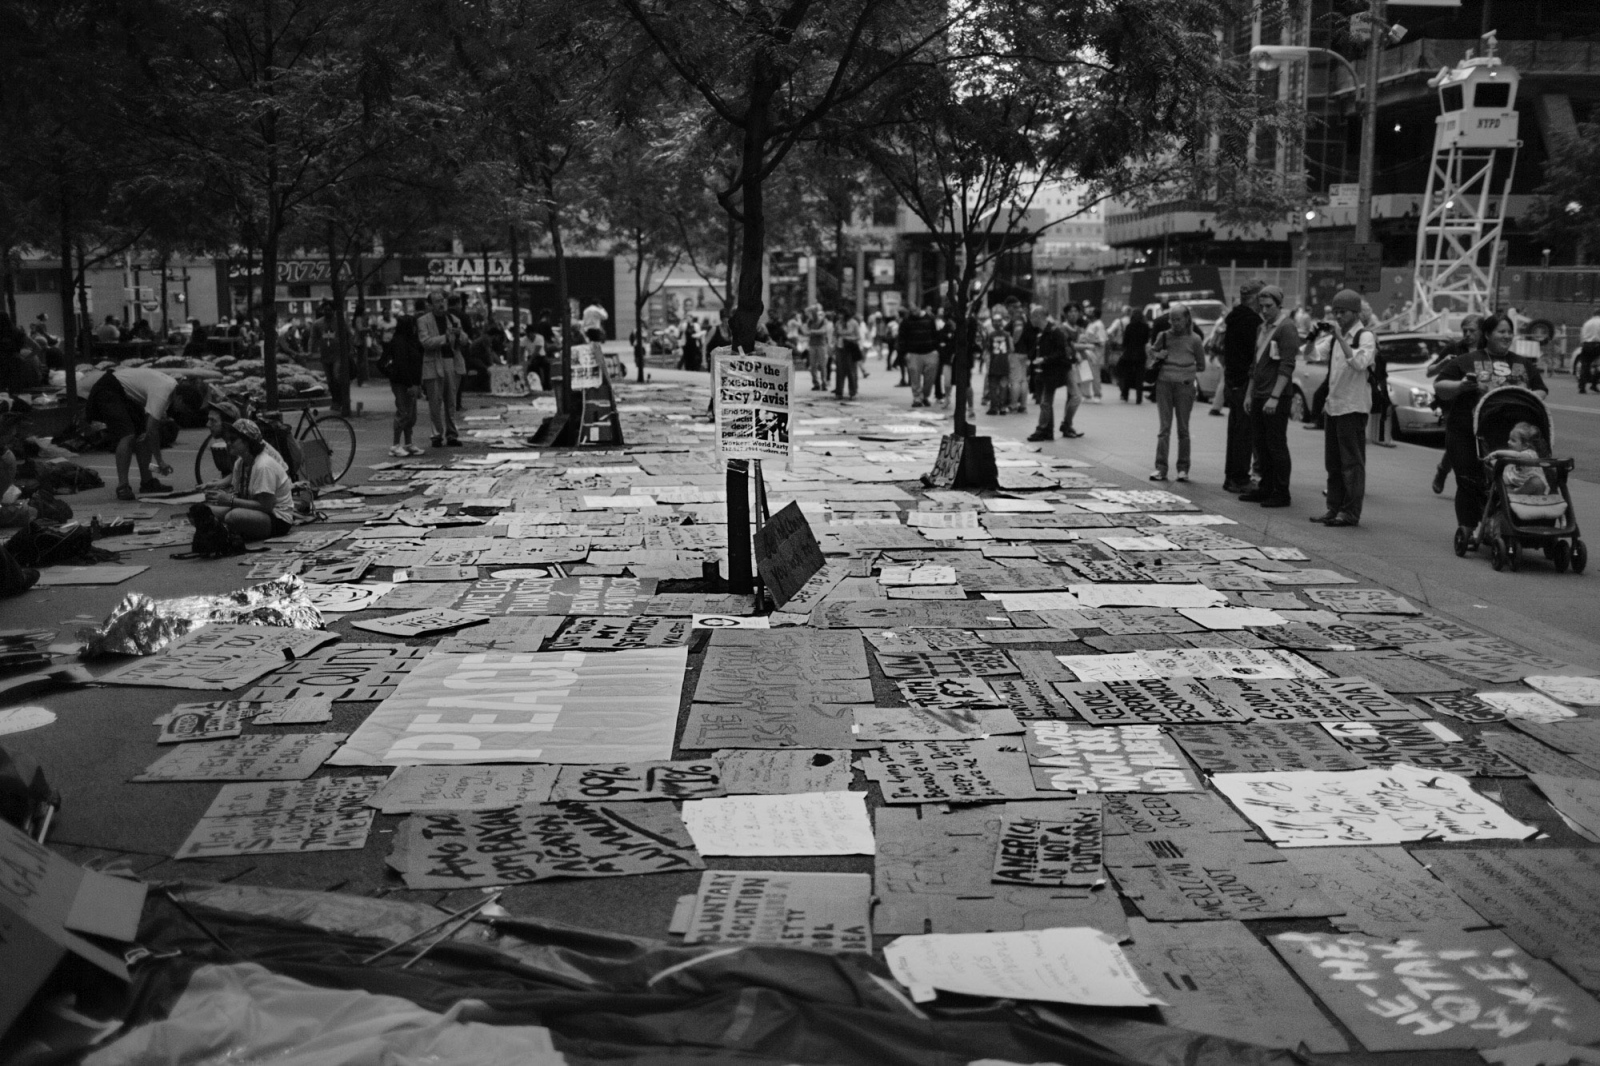  Protest signs lay on the groun...New York City, September 2011. 